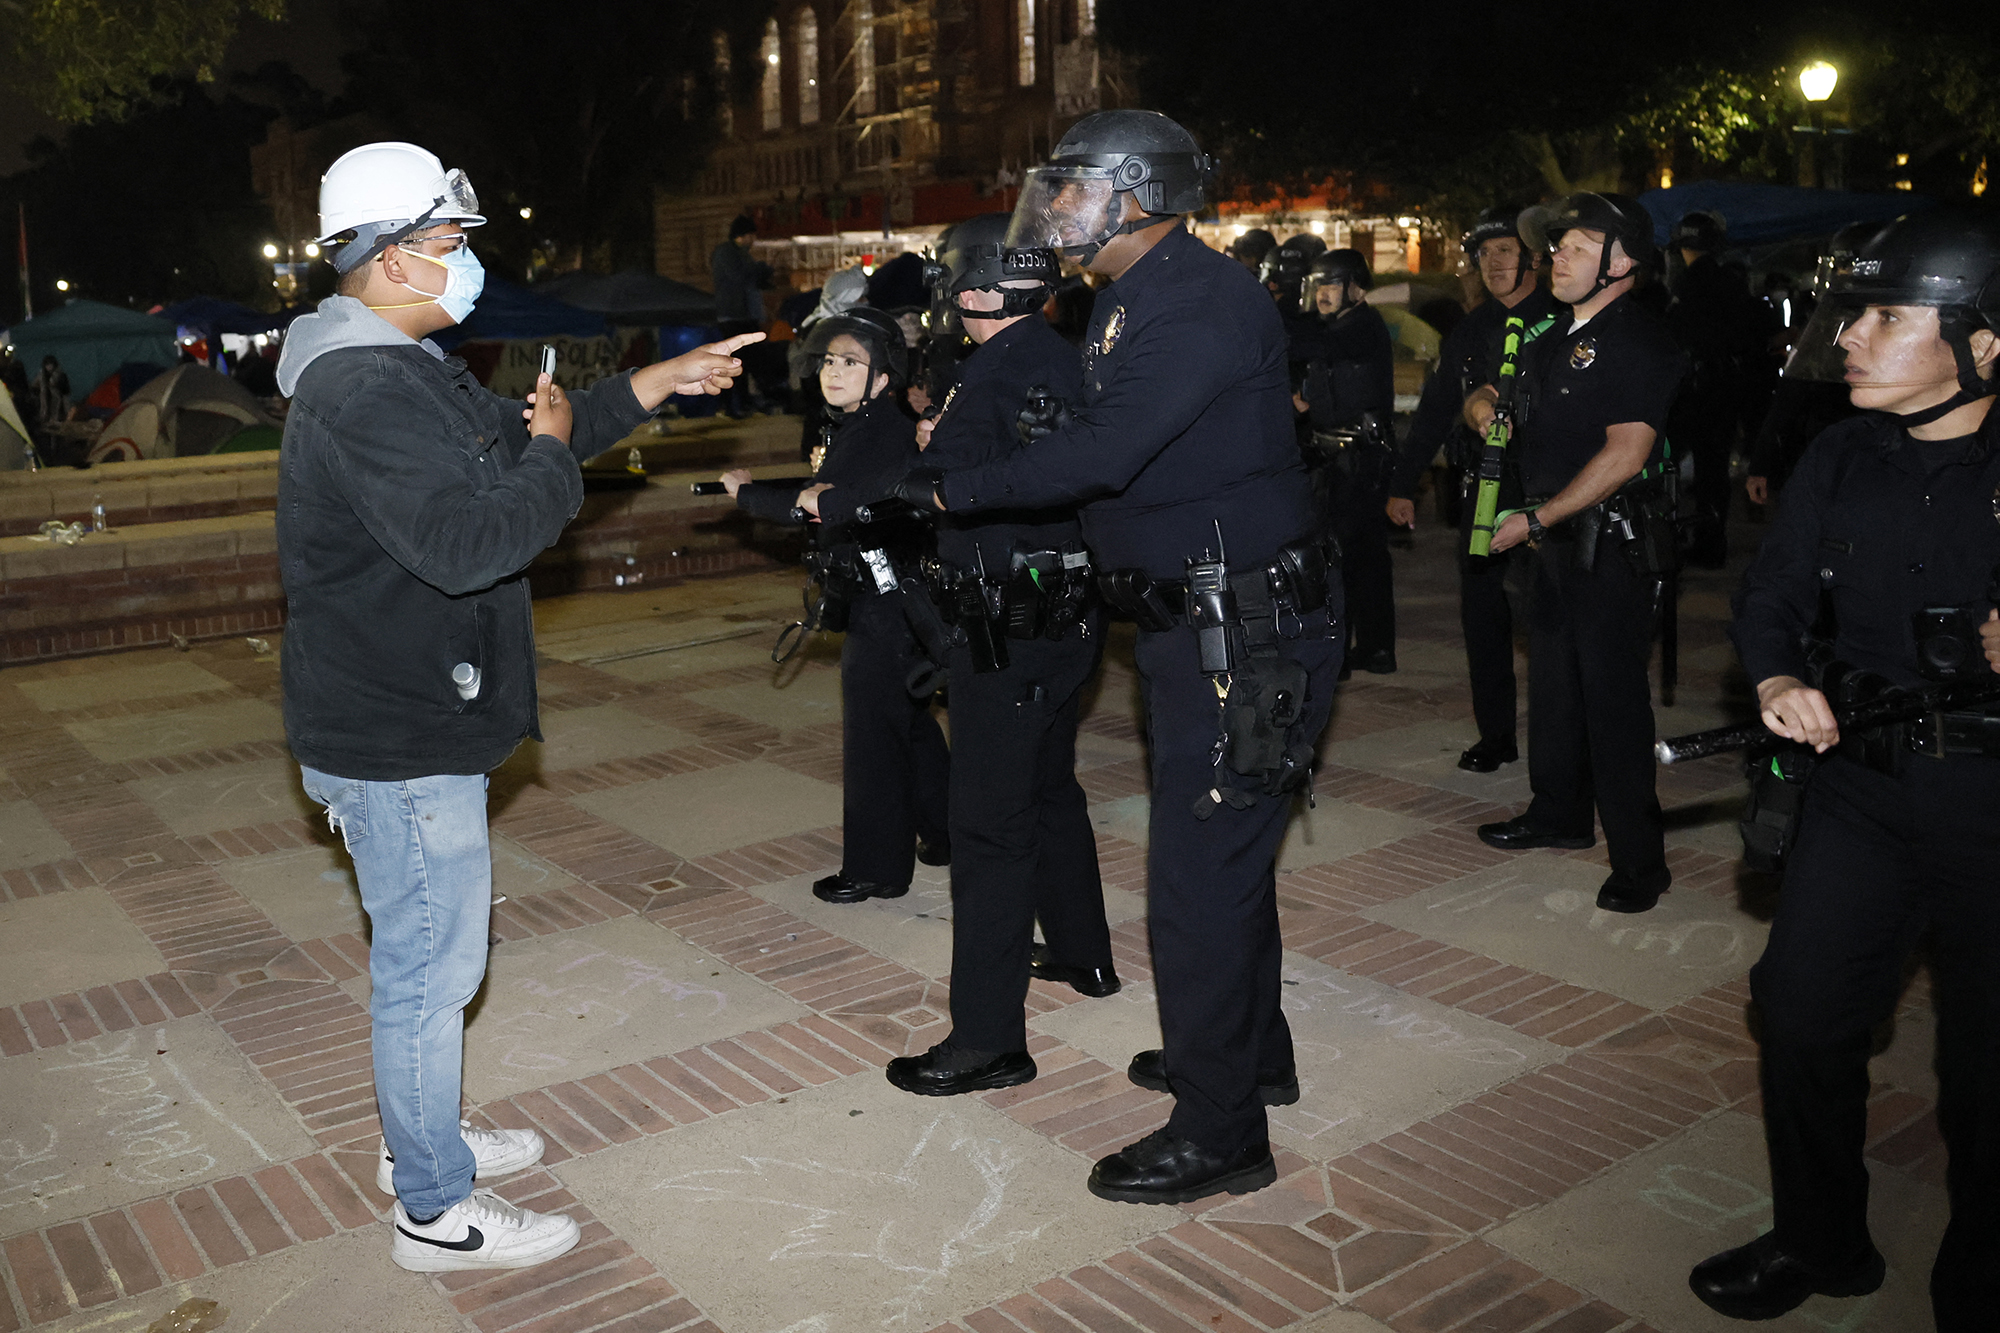 An activist confronts police as they breach the encampment of Pro-Palestinian students demonstrating on the campus of UCLA in Los Angeles, California, early on May 2.